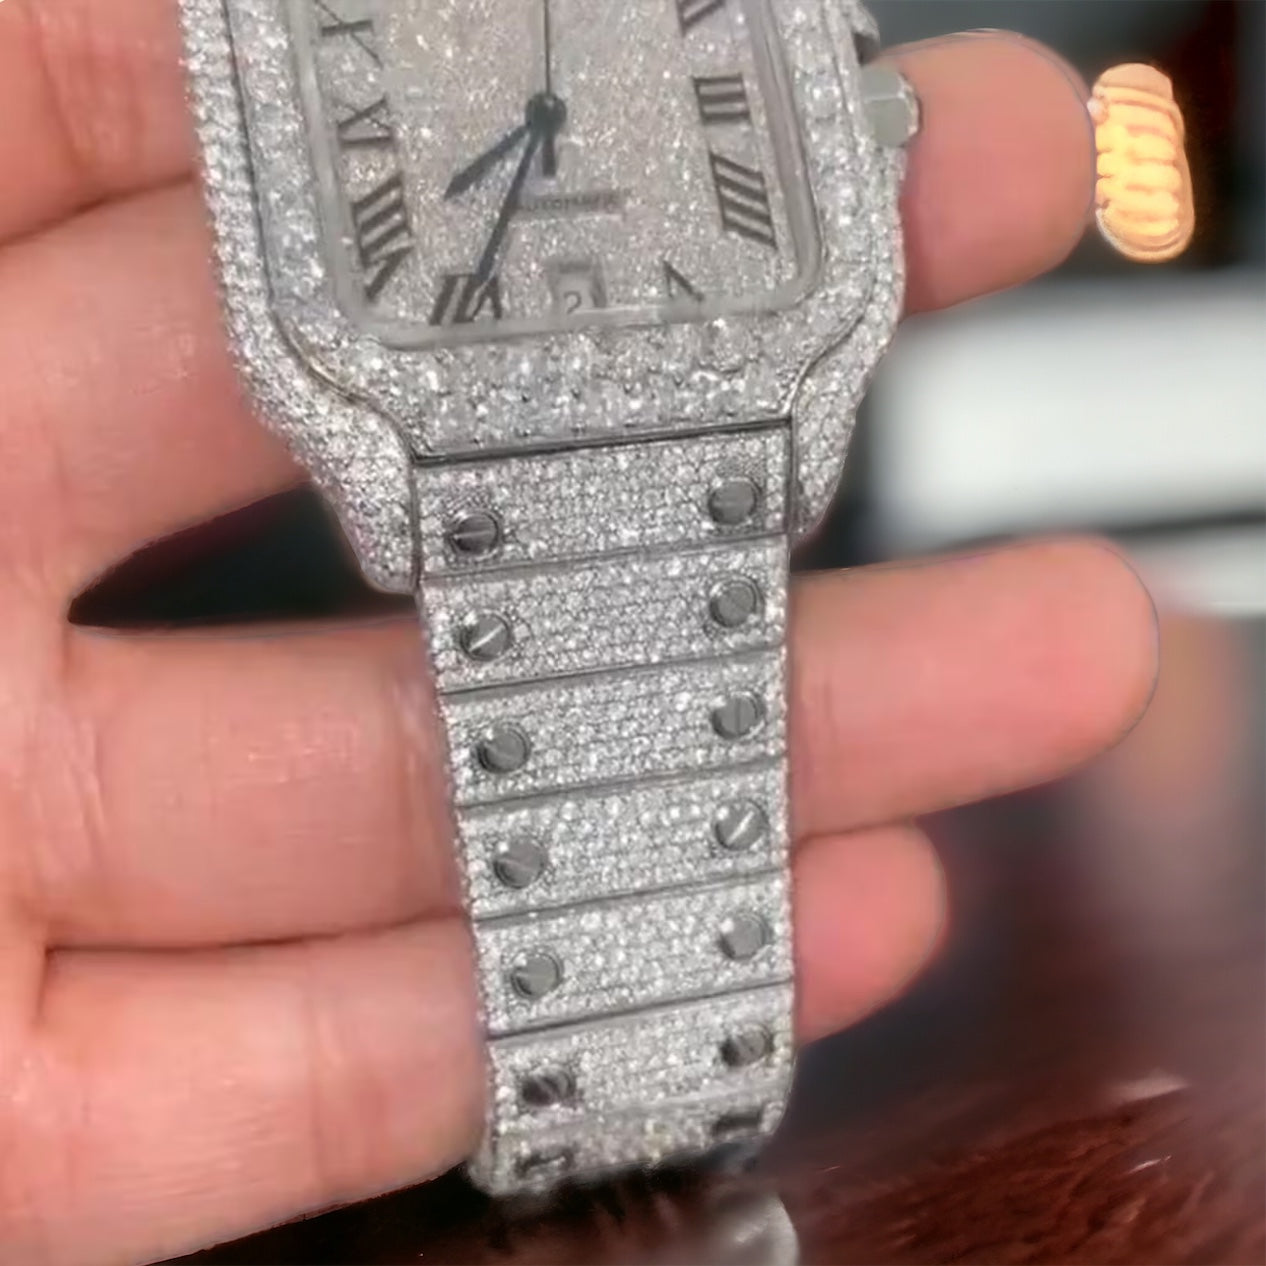 Watch | luxury watch | automatic watch | watches for men | hip hop watch | diamond watch | iced out watch | moissanite watch | iced out |